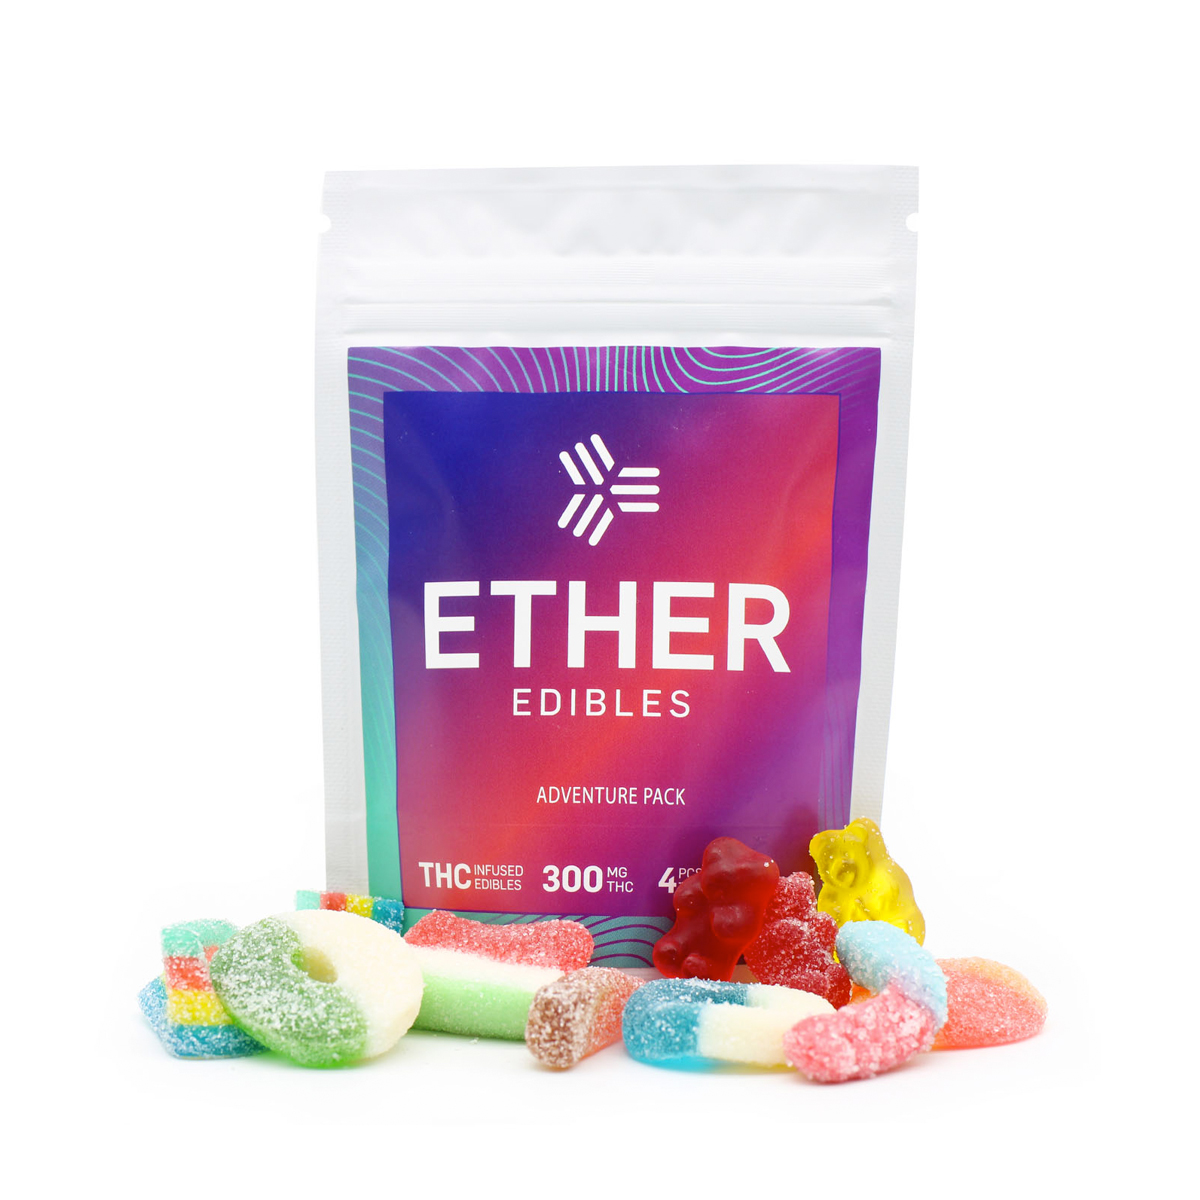 Buy Ether Edibles Adventure Pack 300mg Online